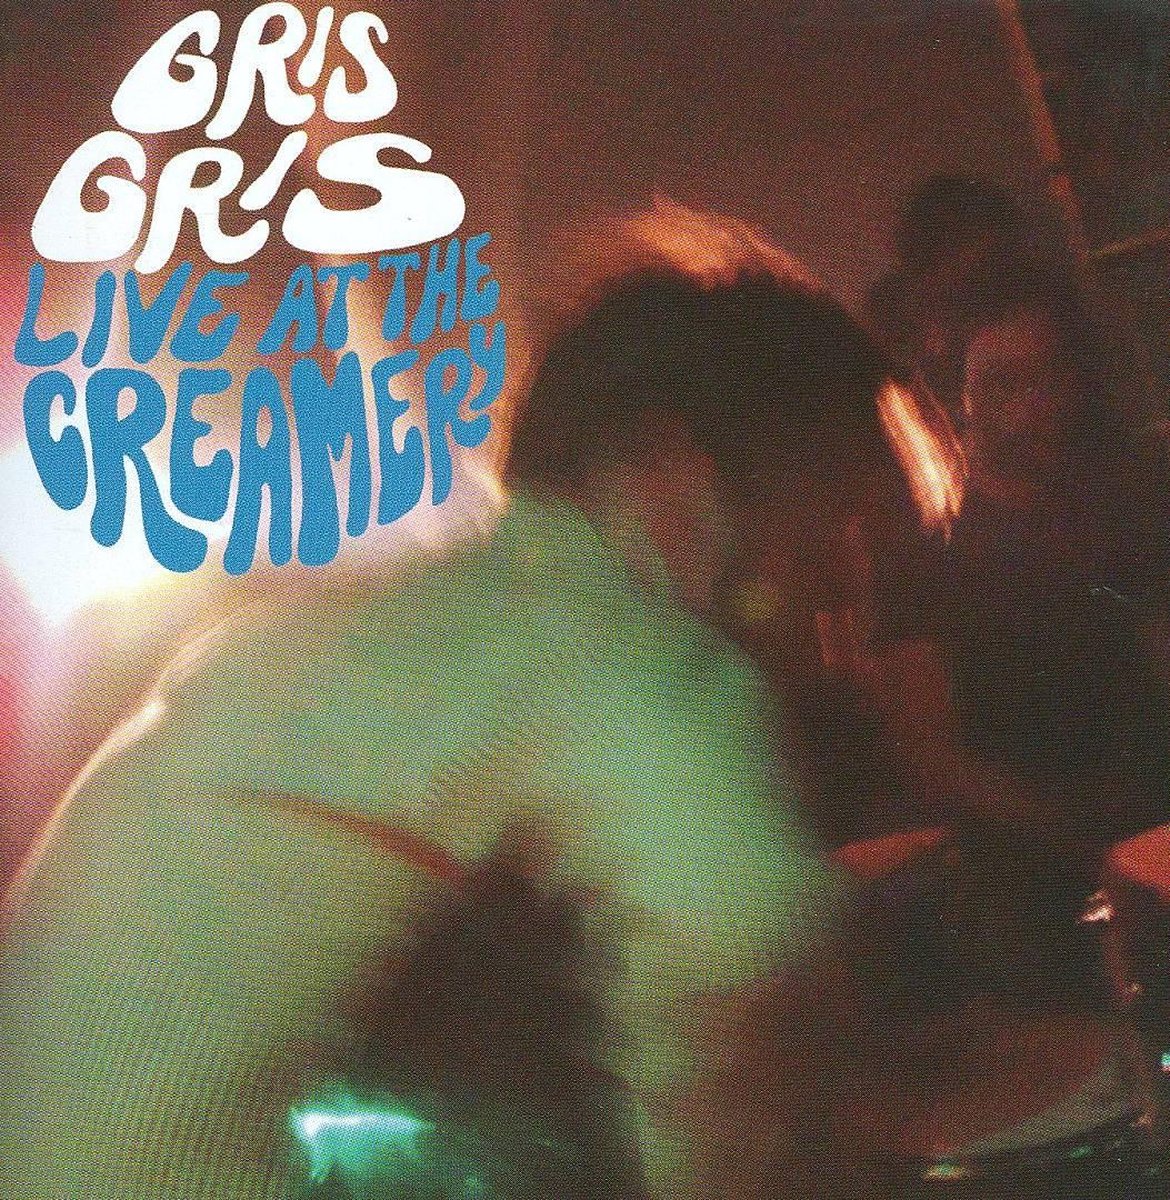 Live At The Creamery - The Gris Gris